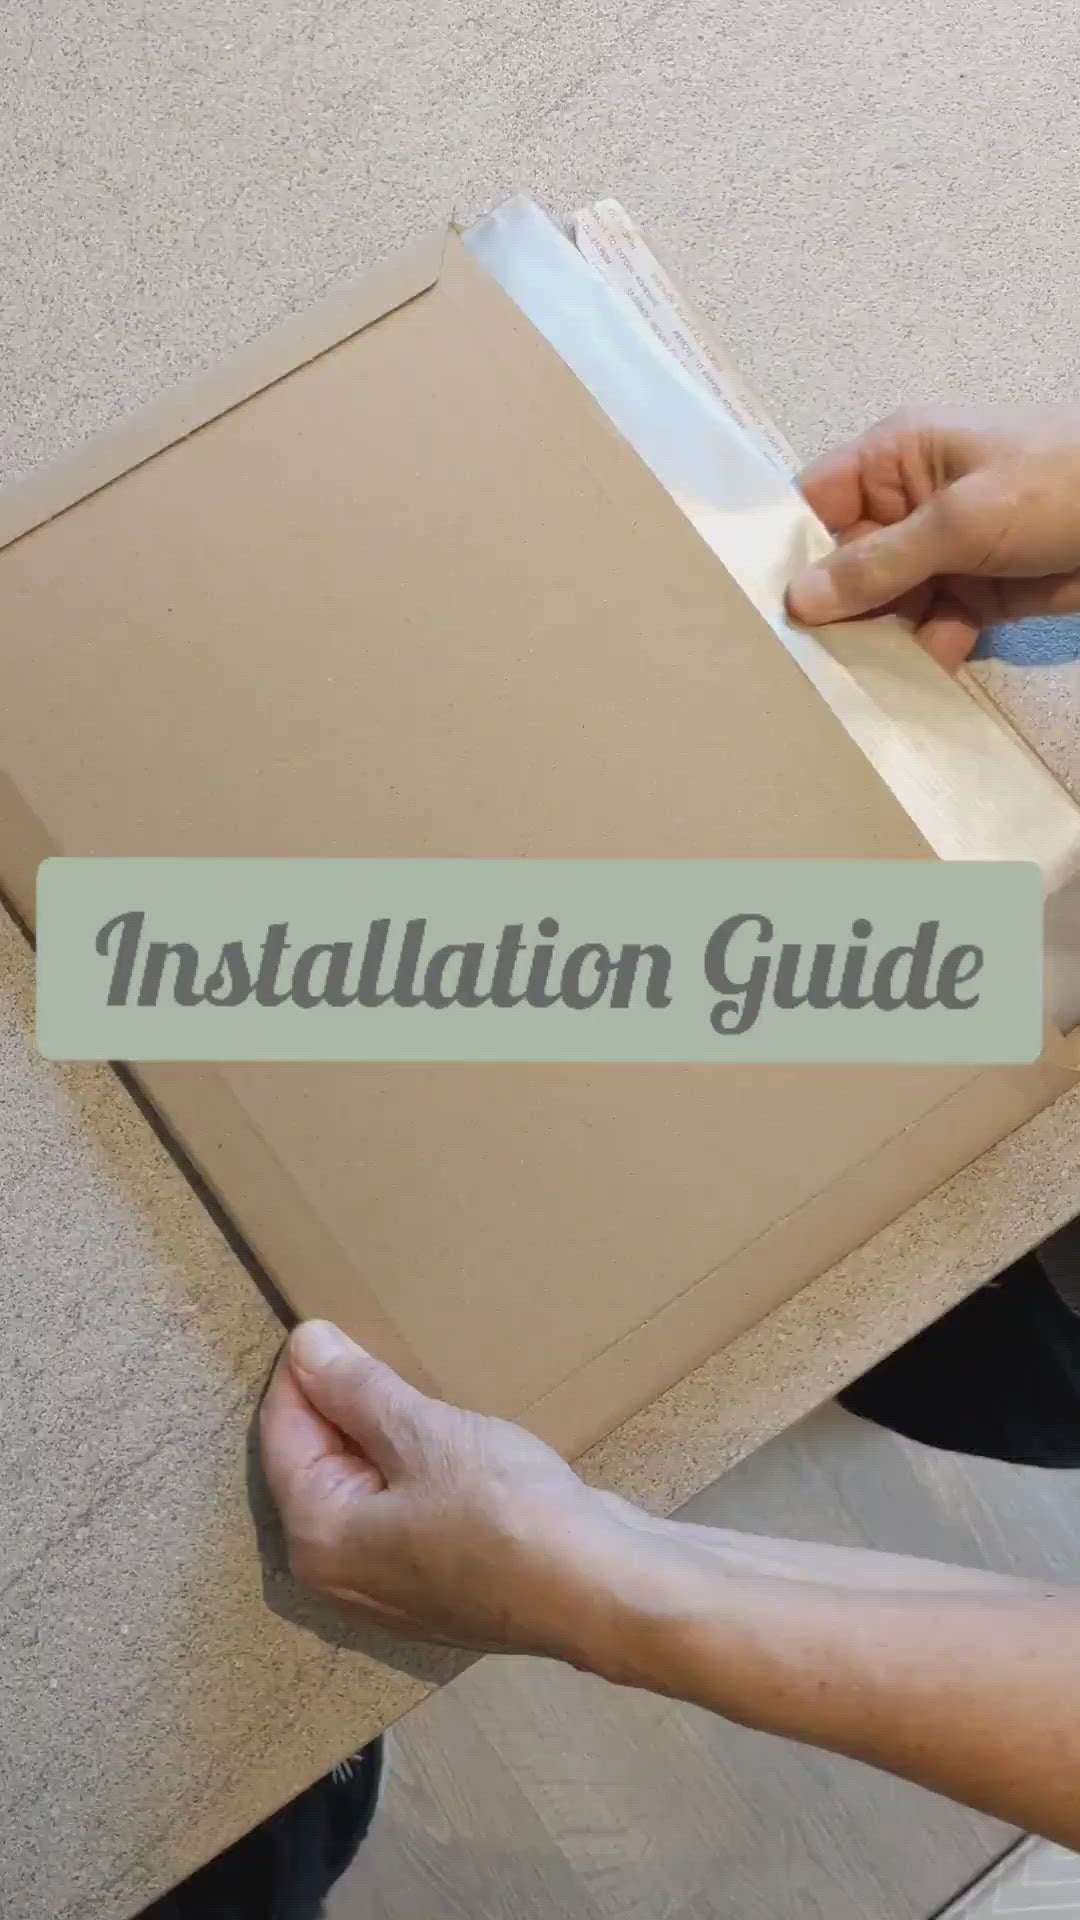 installation guid, how to video